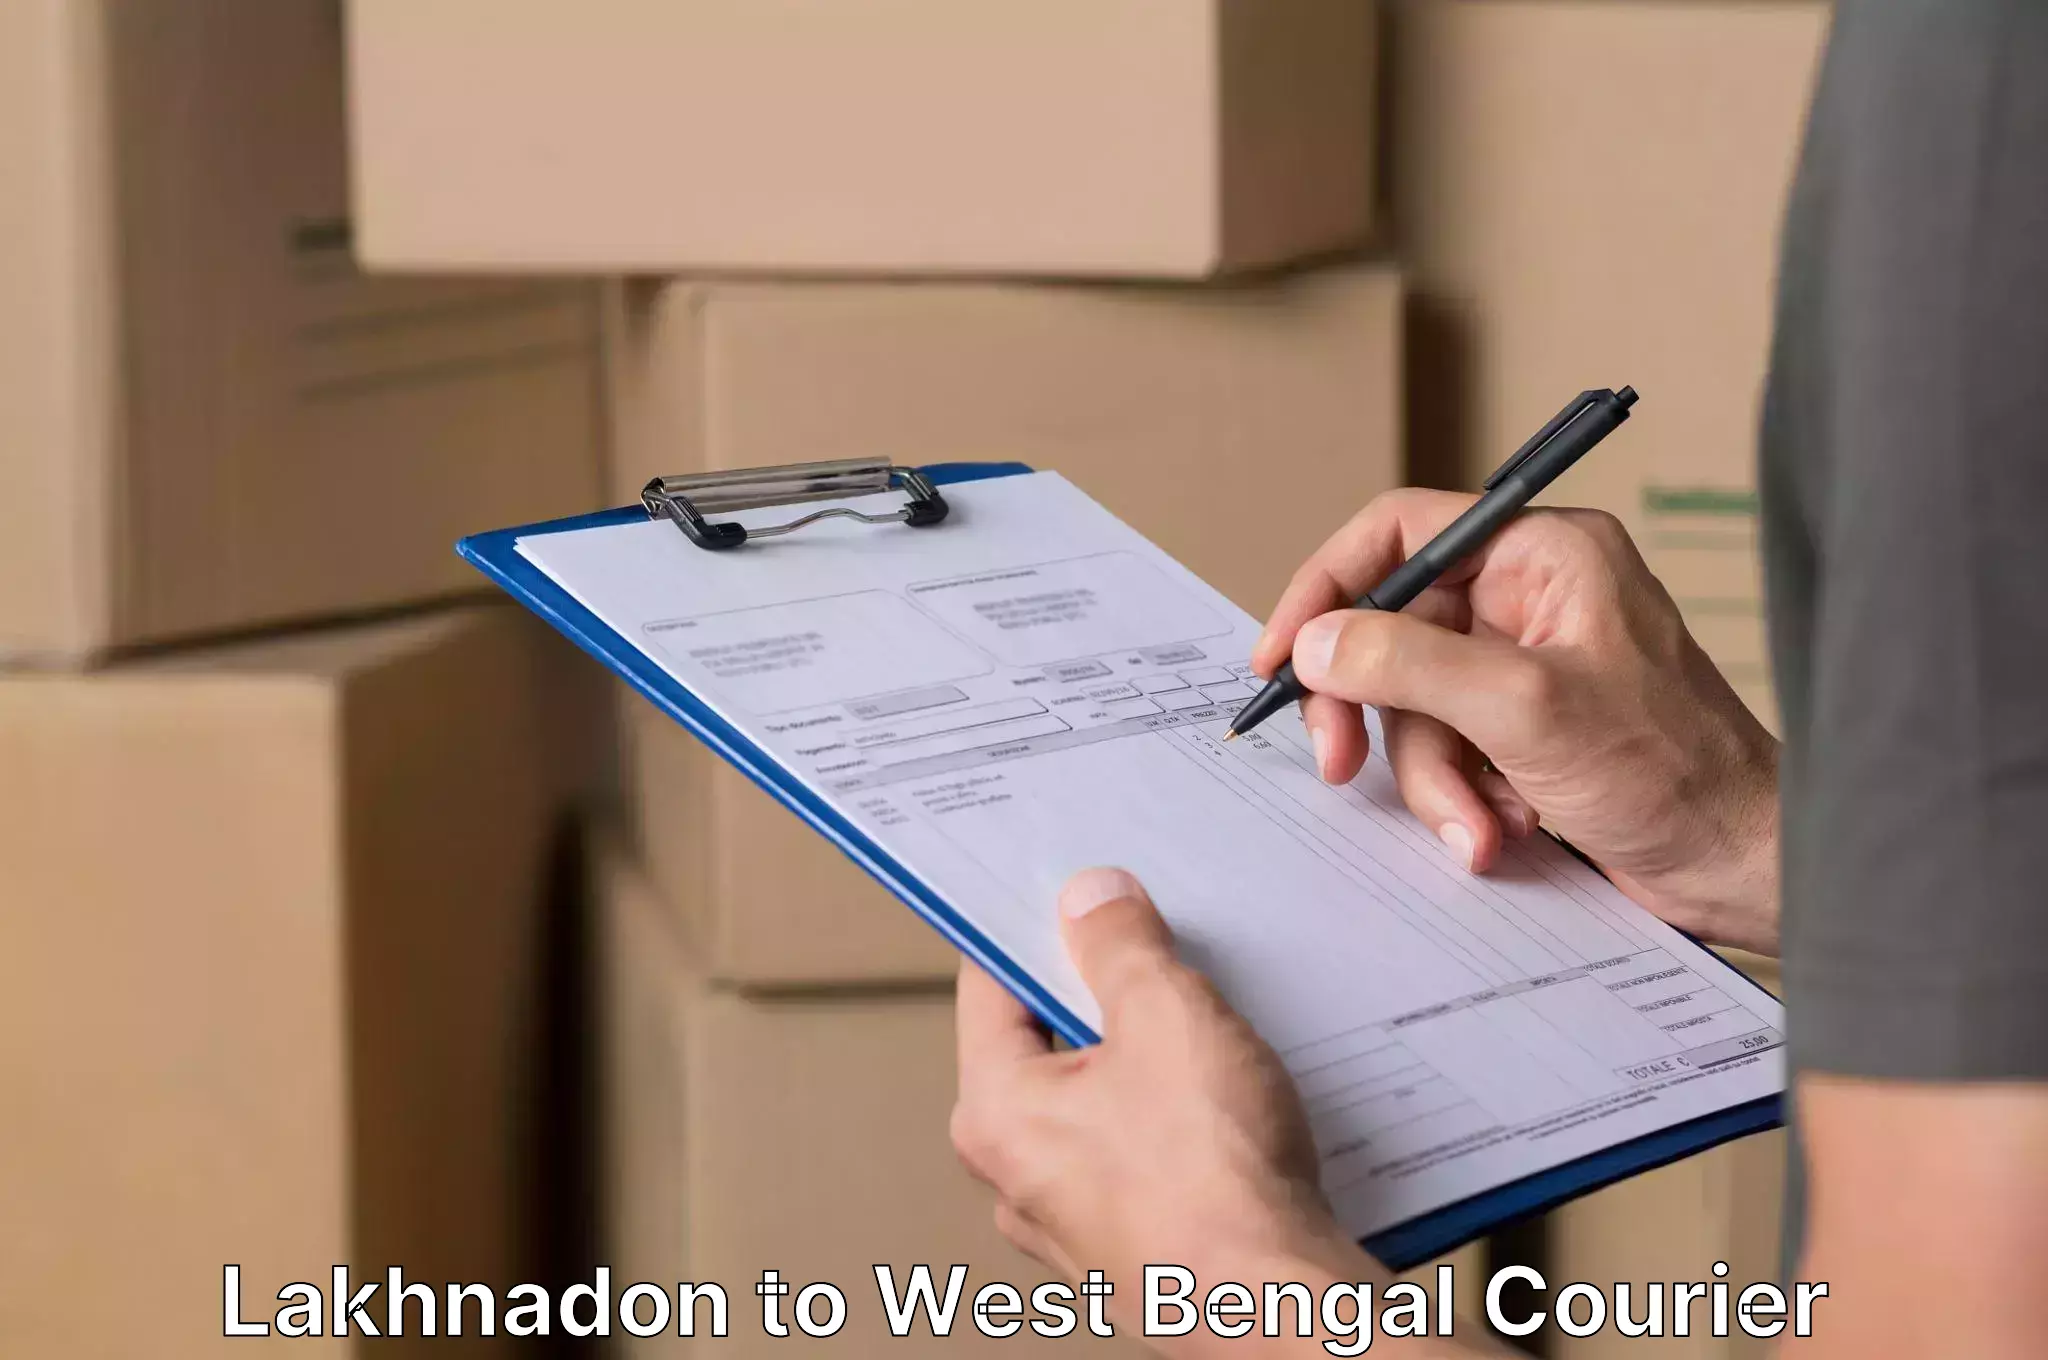 Furniture delivery service Lakhnadon to West Bengal